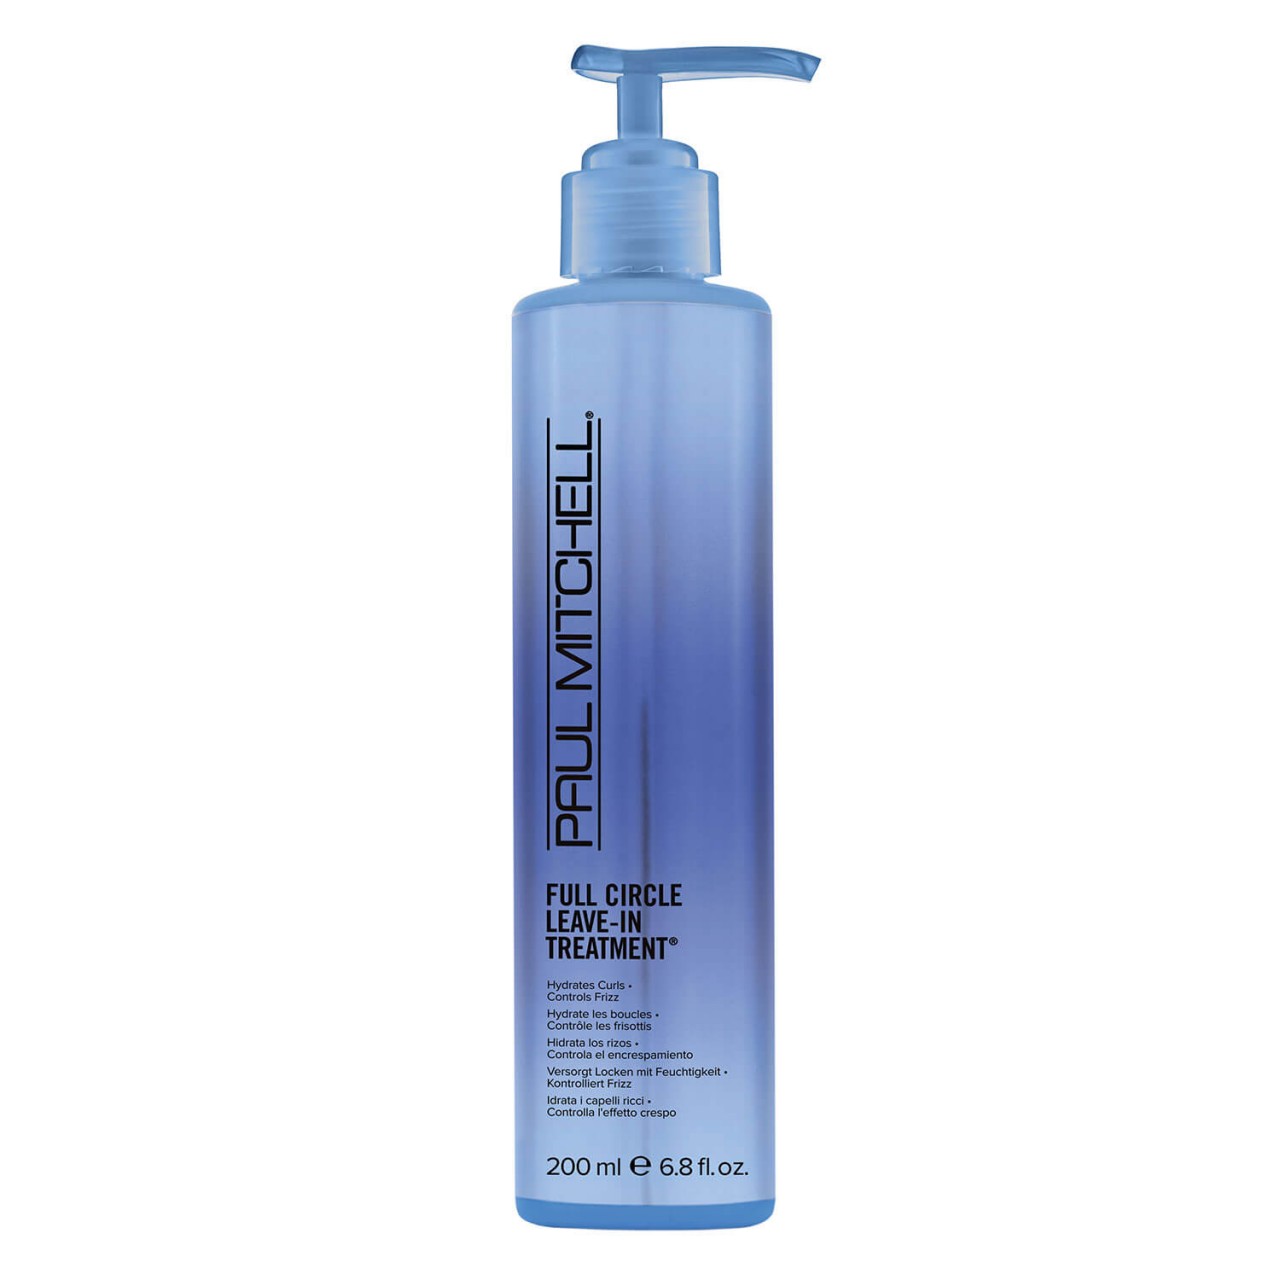 Curls - Full Circle Leave-in Treatment von Paul Mitchell